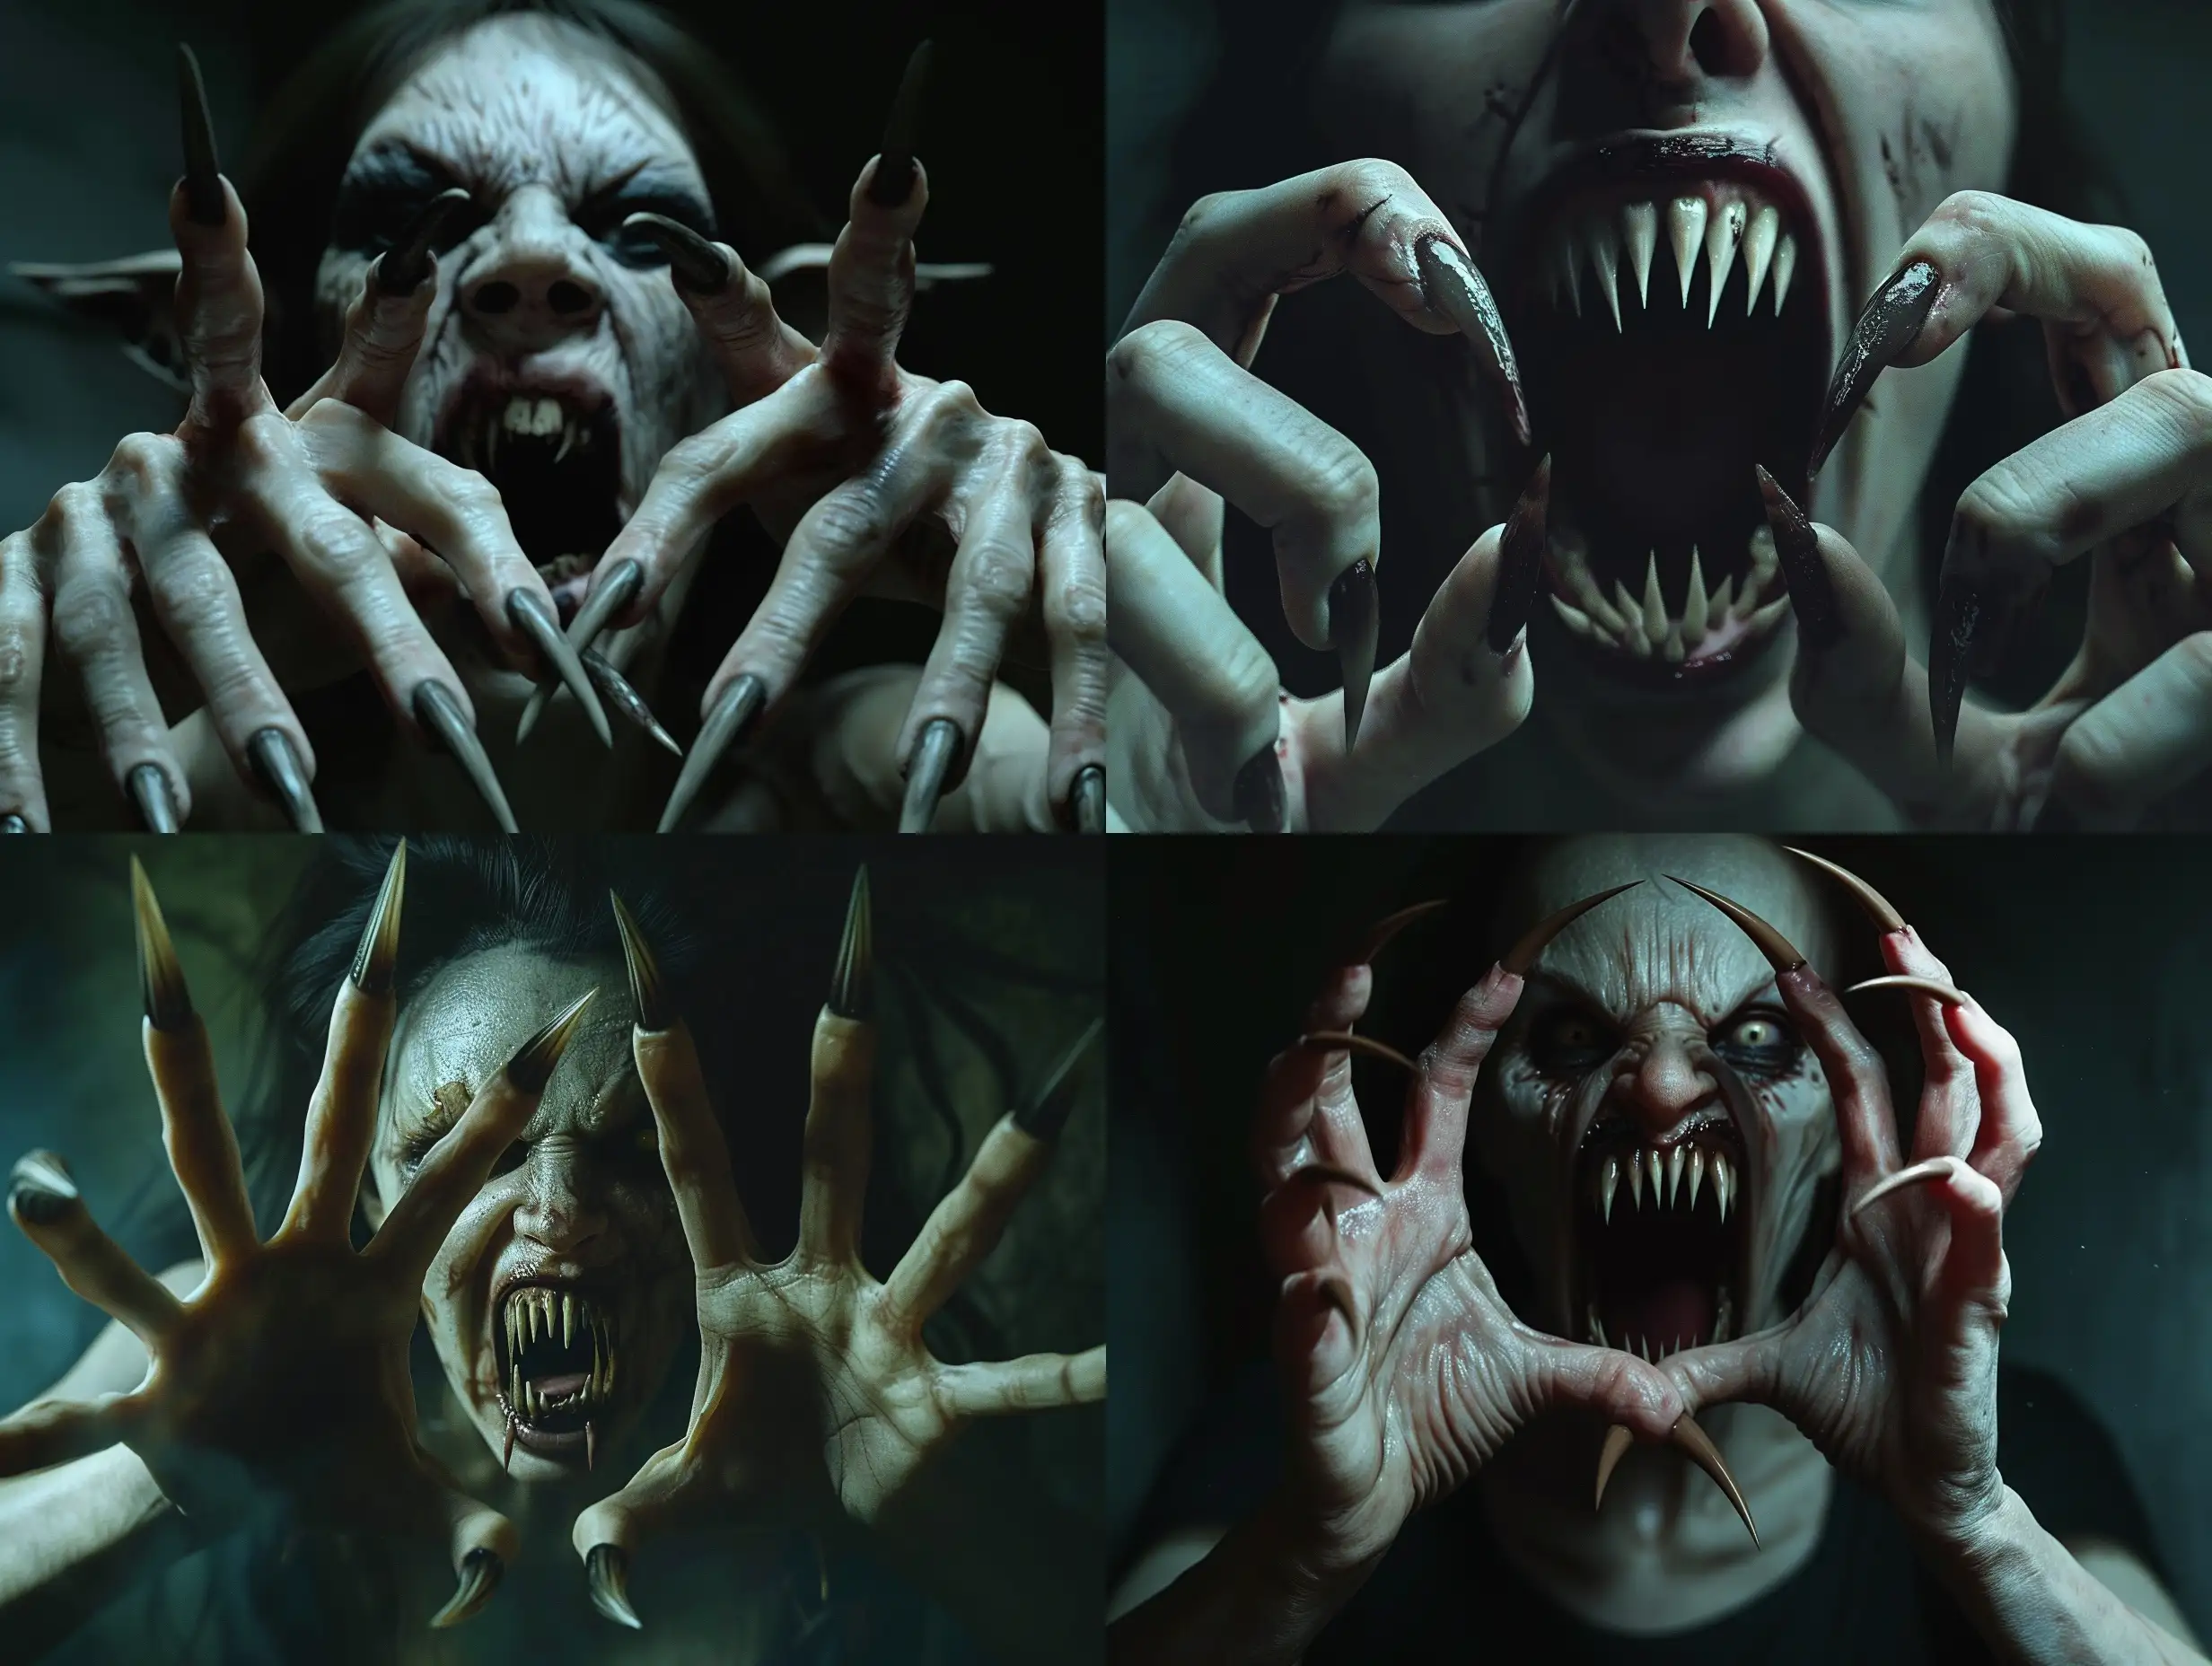 A photorealistic scene of a wild ugly monstruos vampire woman with extra long pointed fingernails, on each hands with five fingers, her mouth is threateningly open, and terrible teeth look like fangs, the vampire looks like she climbed out of the grave, her nails resemble the claws of a predators.scene inside darkness room,hyper-realism, cinematic, high detail, photo detailing, high quality, photorealistic, aggressive, dark atmosphere, realistic, the smallest details, detailed nails, horror, atmospheric lighting, full anatomical, photorealism, detailed, textured, dark, haunting, night-time scene, intense, creepy, undead, spooky, eerie, atmospheric lighting, nightmare, grotesque, terrifying, realistic anatomy, human hands, very clear without flaws with five fingers.
